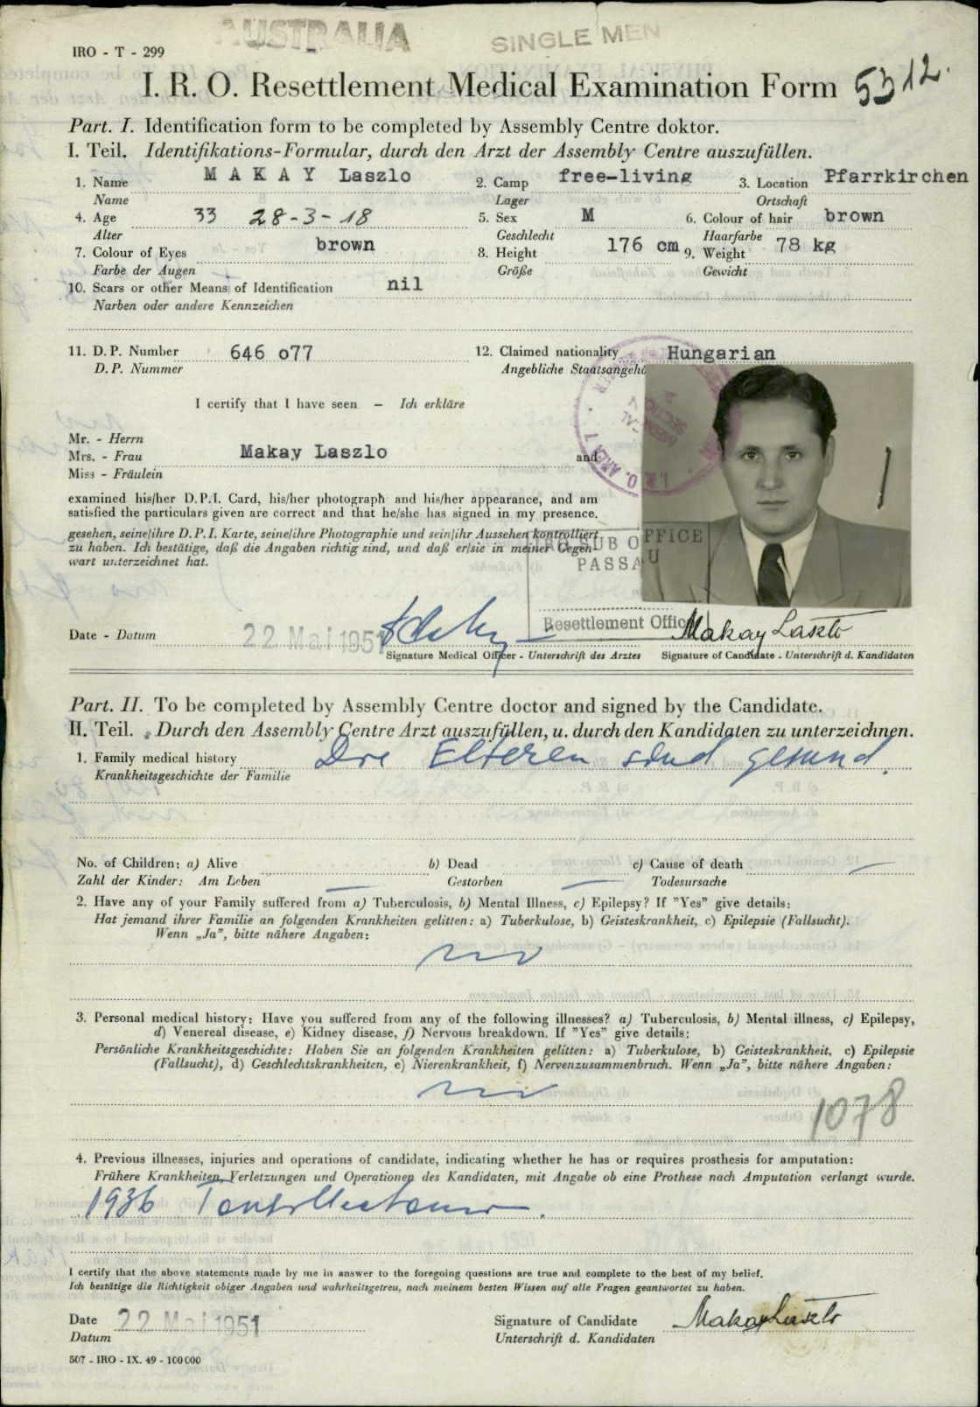 Medical form for Lazlo Makay’s refugee resettlement with portrait.  